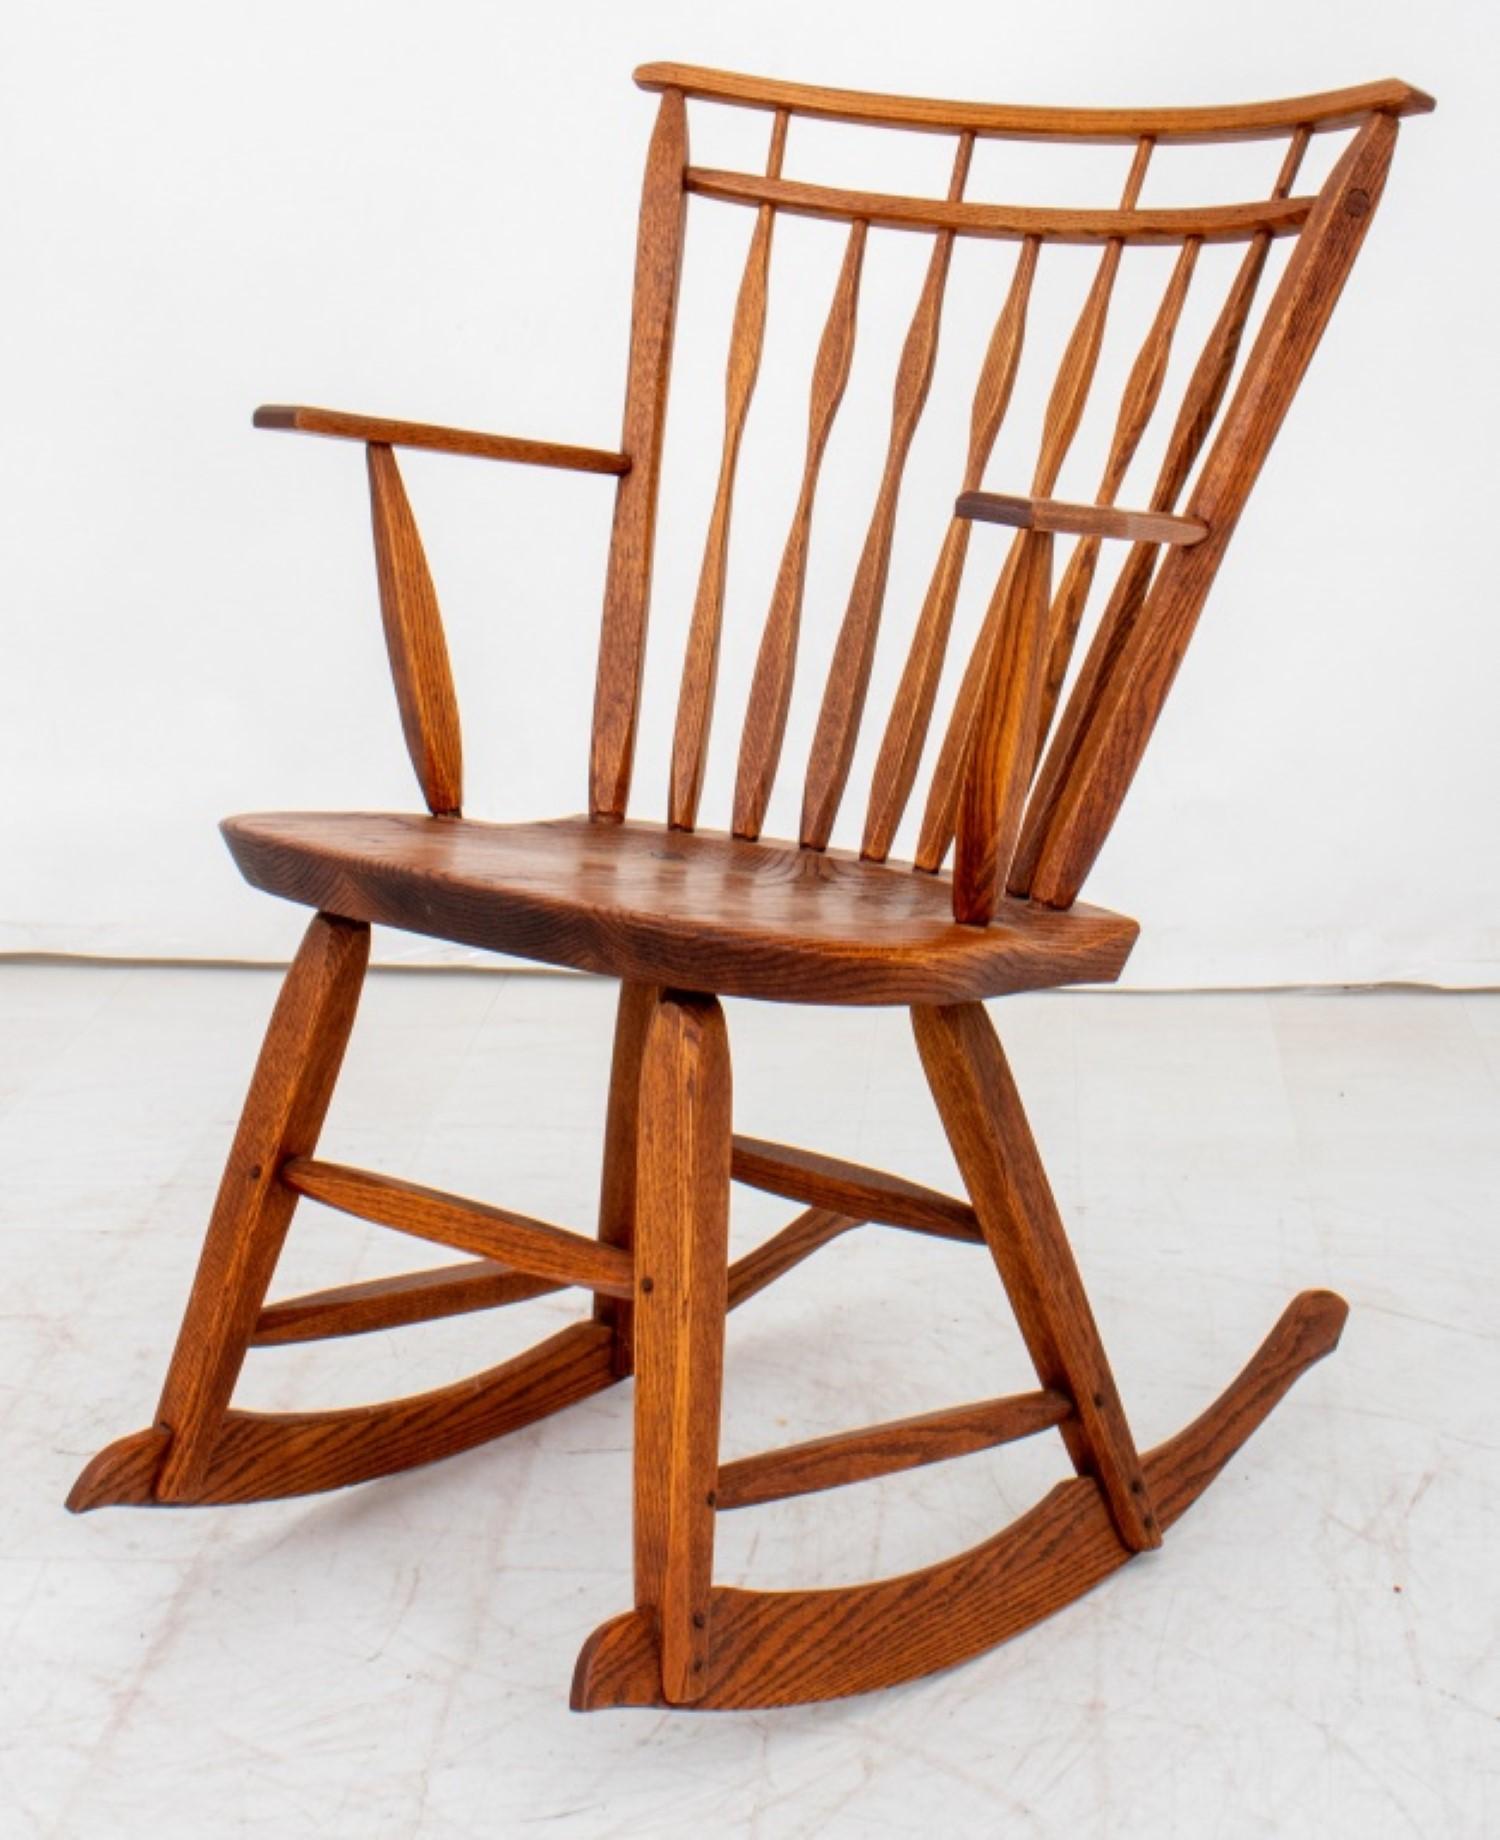 Sturdy oak construction: Oak is a popular choice for rocking chairs due to its strength and durability. Picture the warm tones and natural grain patterns of the wood, adding a touch of rustic charm to your nursery.

Handcrafted appeal: Knowing it's